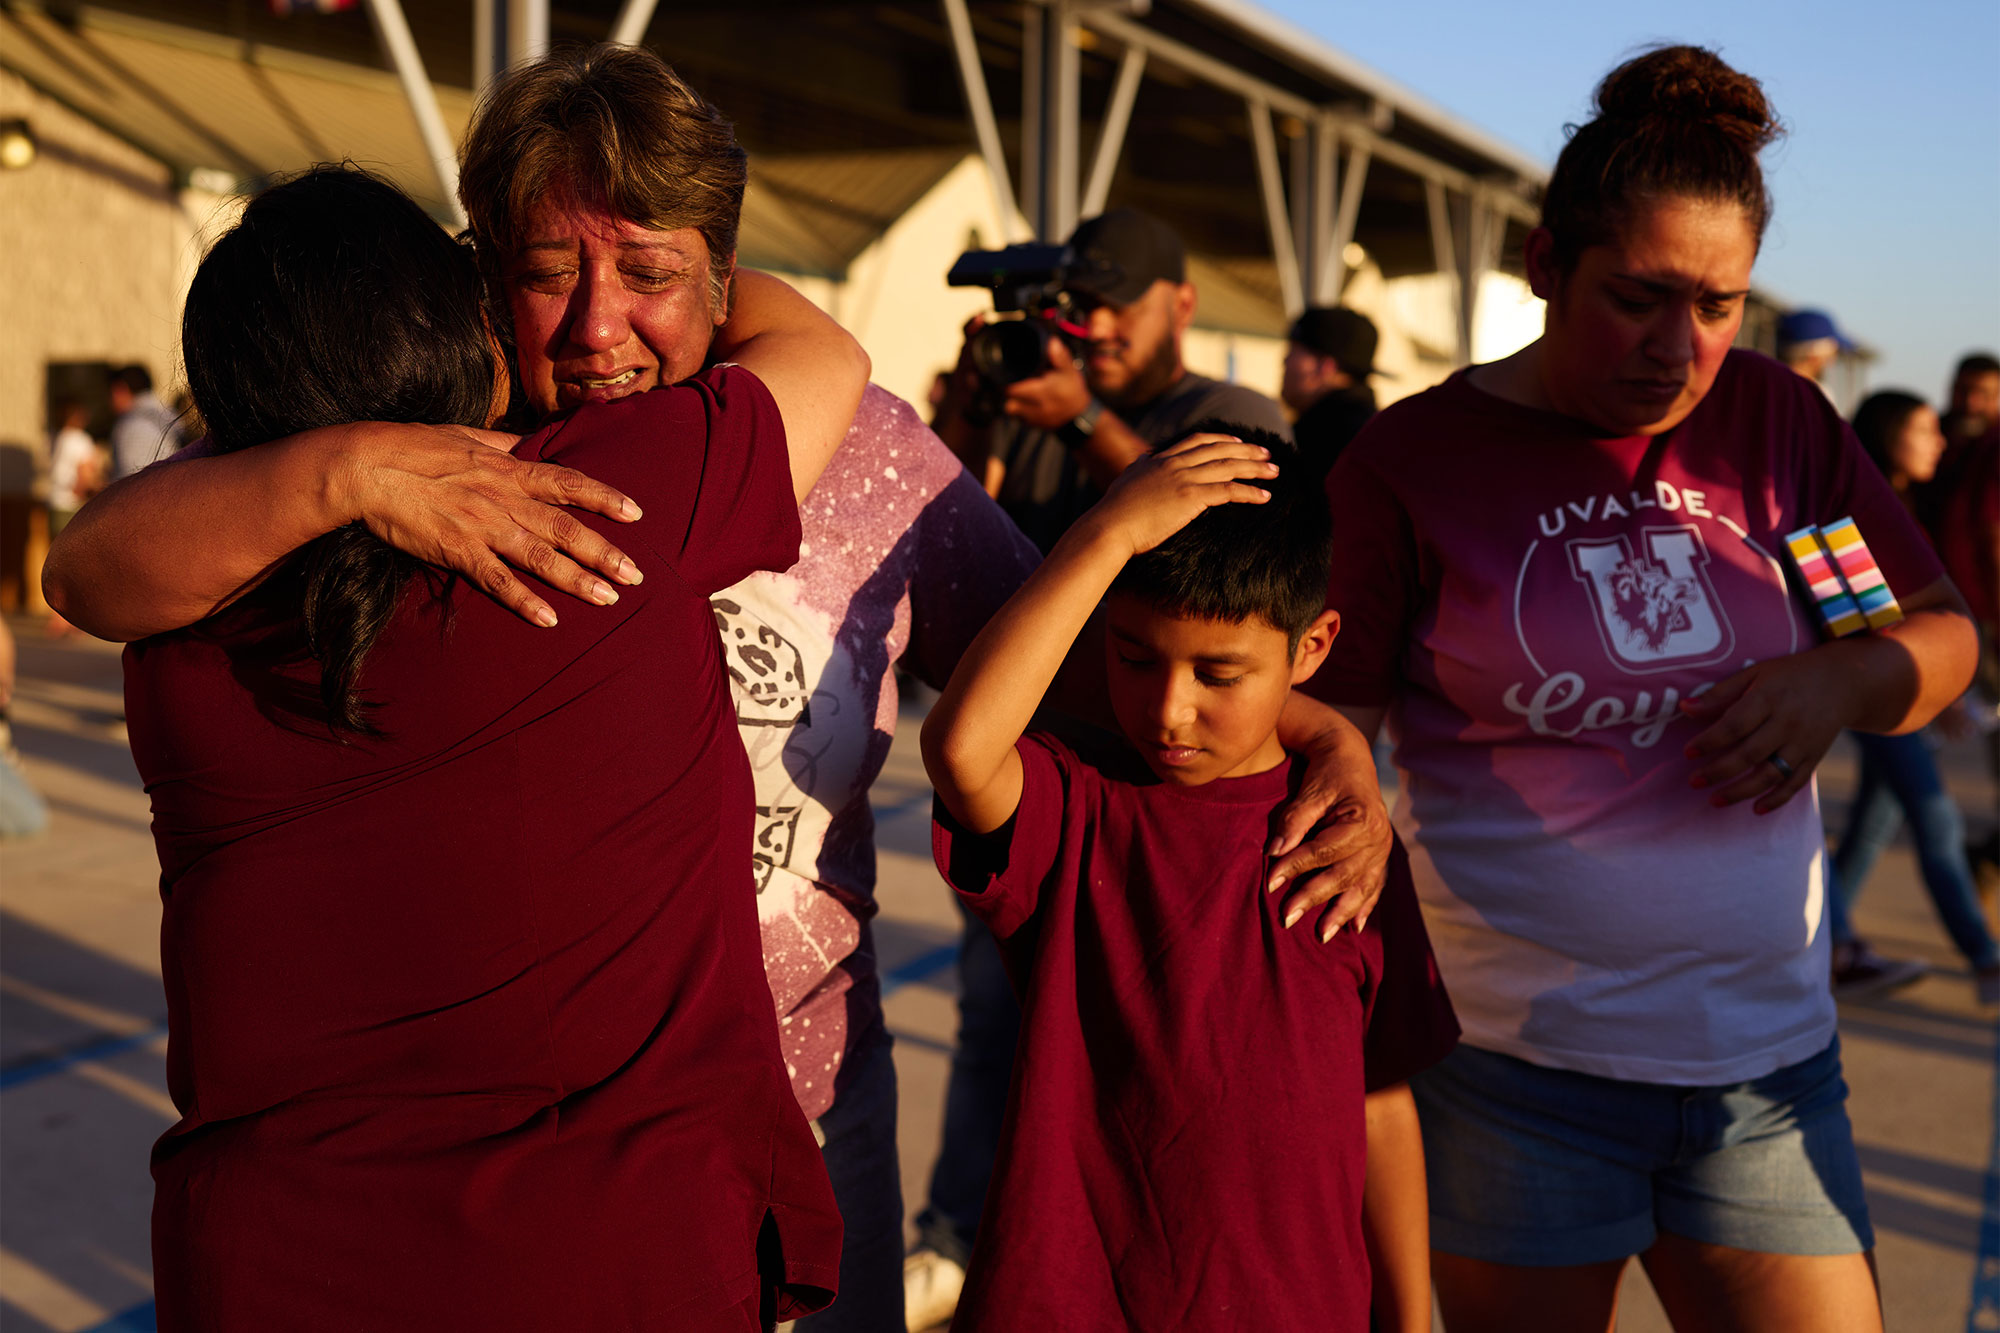 ‘Heal their little hearts and souls:’ Uvalde residents hold tearful prayer vigil